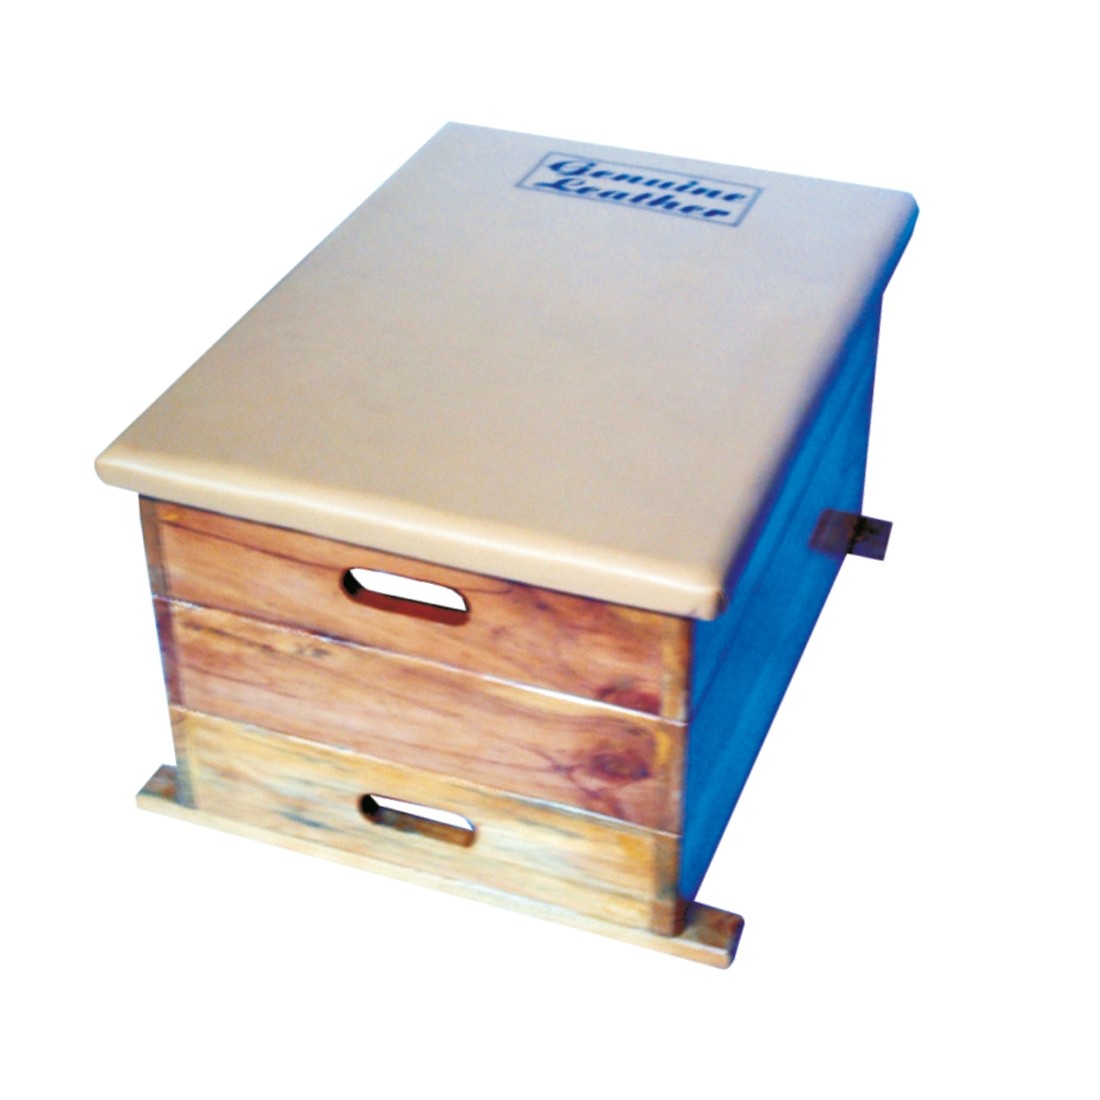 STAG VAULTING BOX JUNIOR 3 PCS. MADE OF BEACH WOOD WITH SYNTHETIC LEATHER